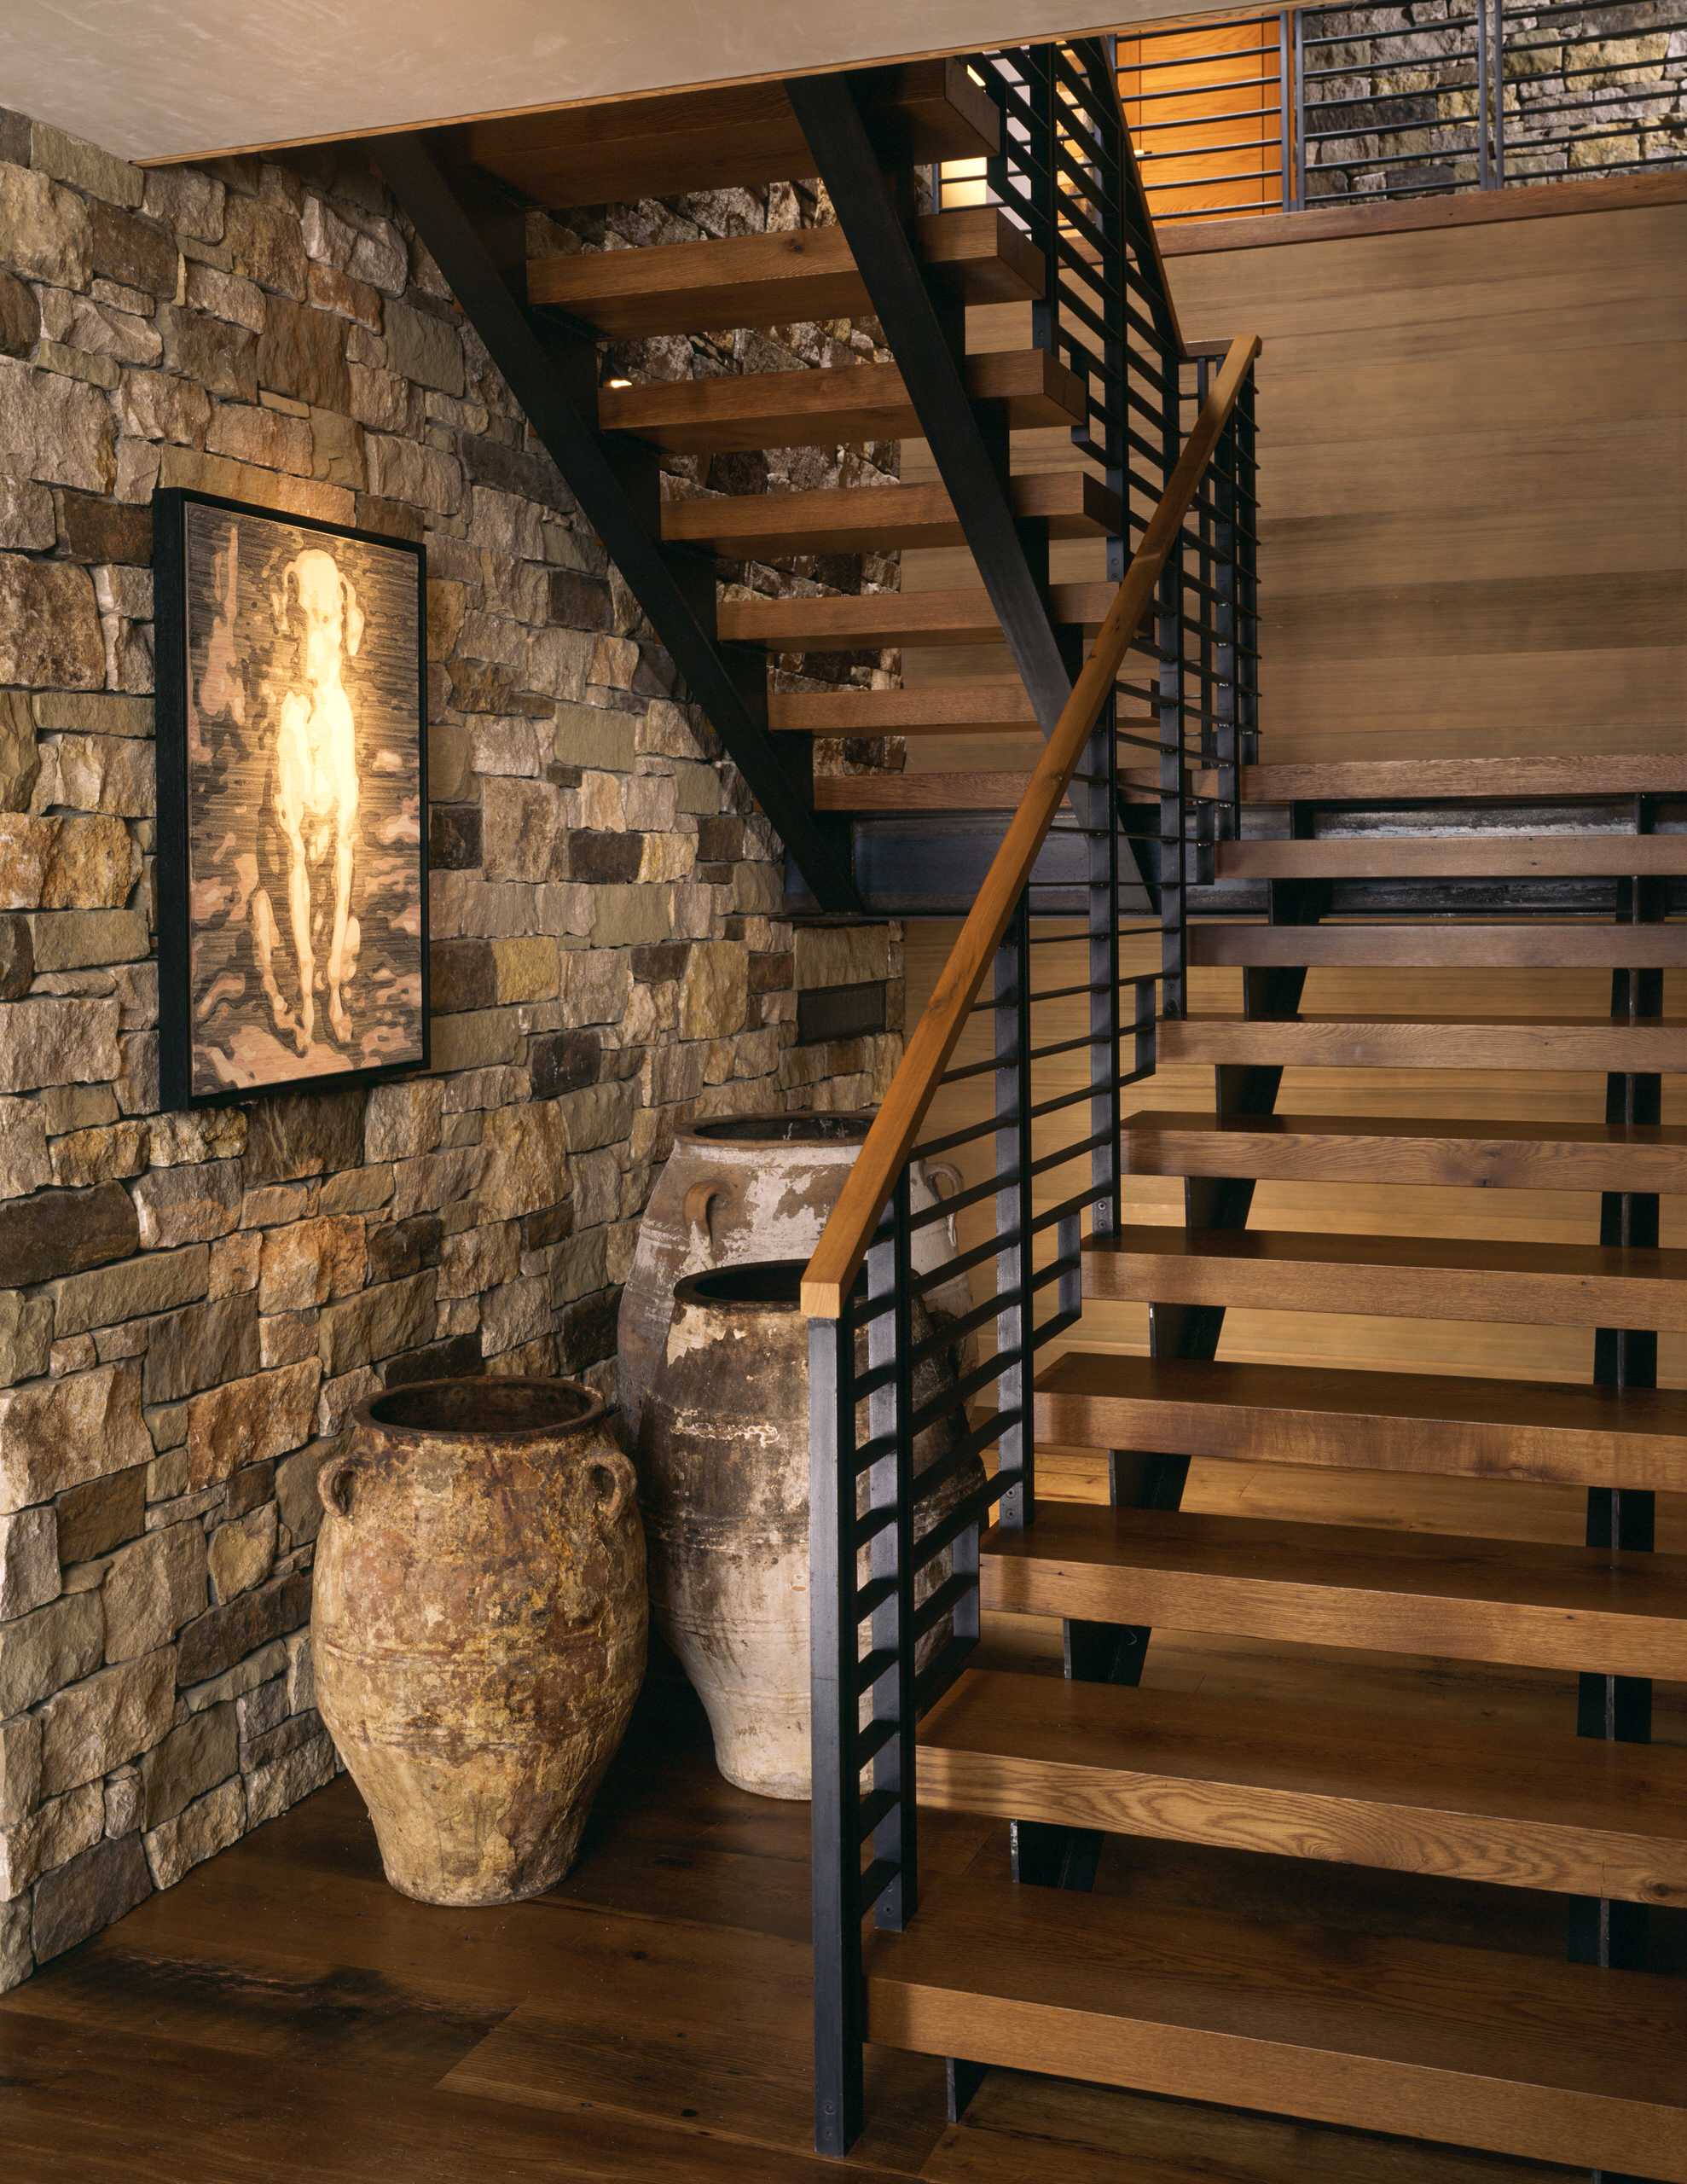 75 Staircase Ideas You'll Love - January, 2023 | Houzz